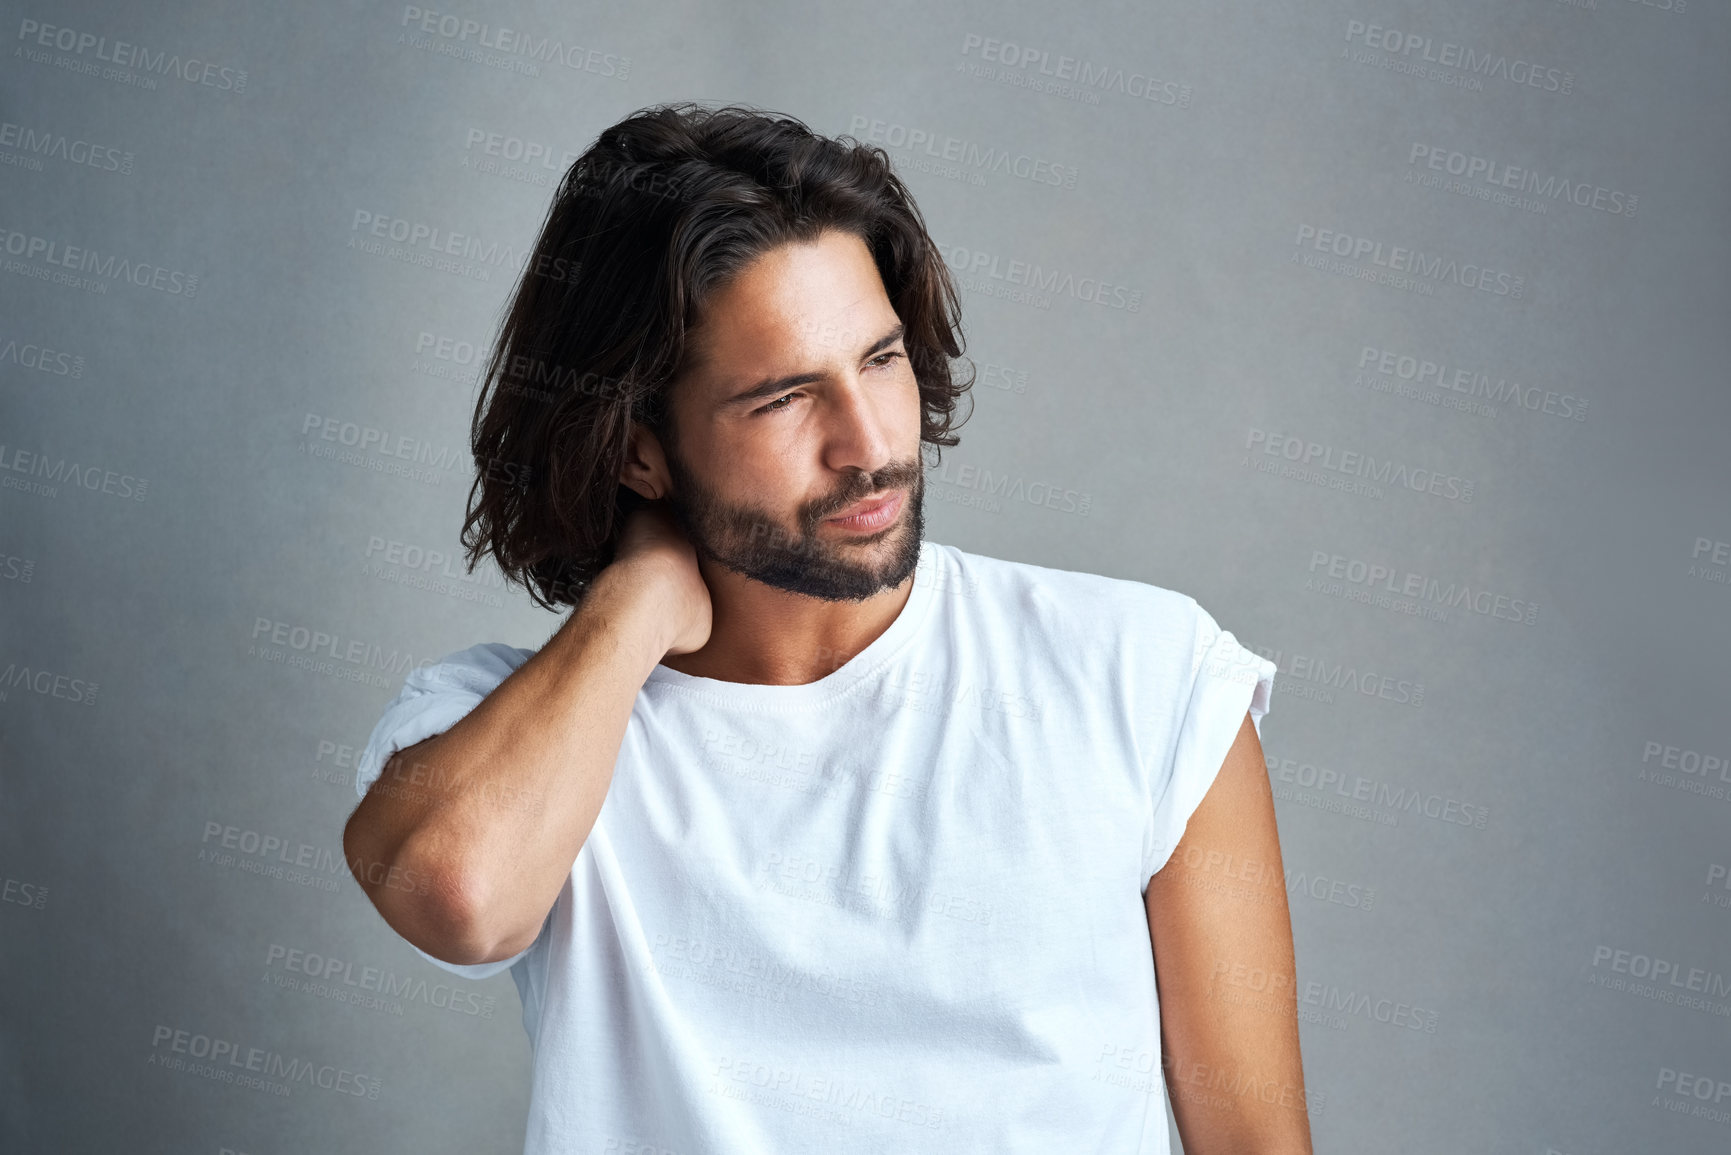 Buy stock photo Studio shot of a handsome young man experiencing neck ache against a grey background